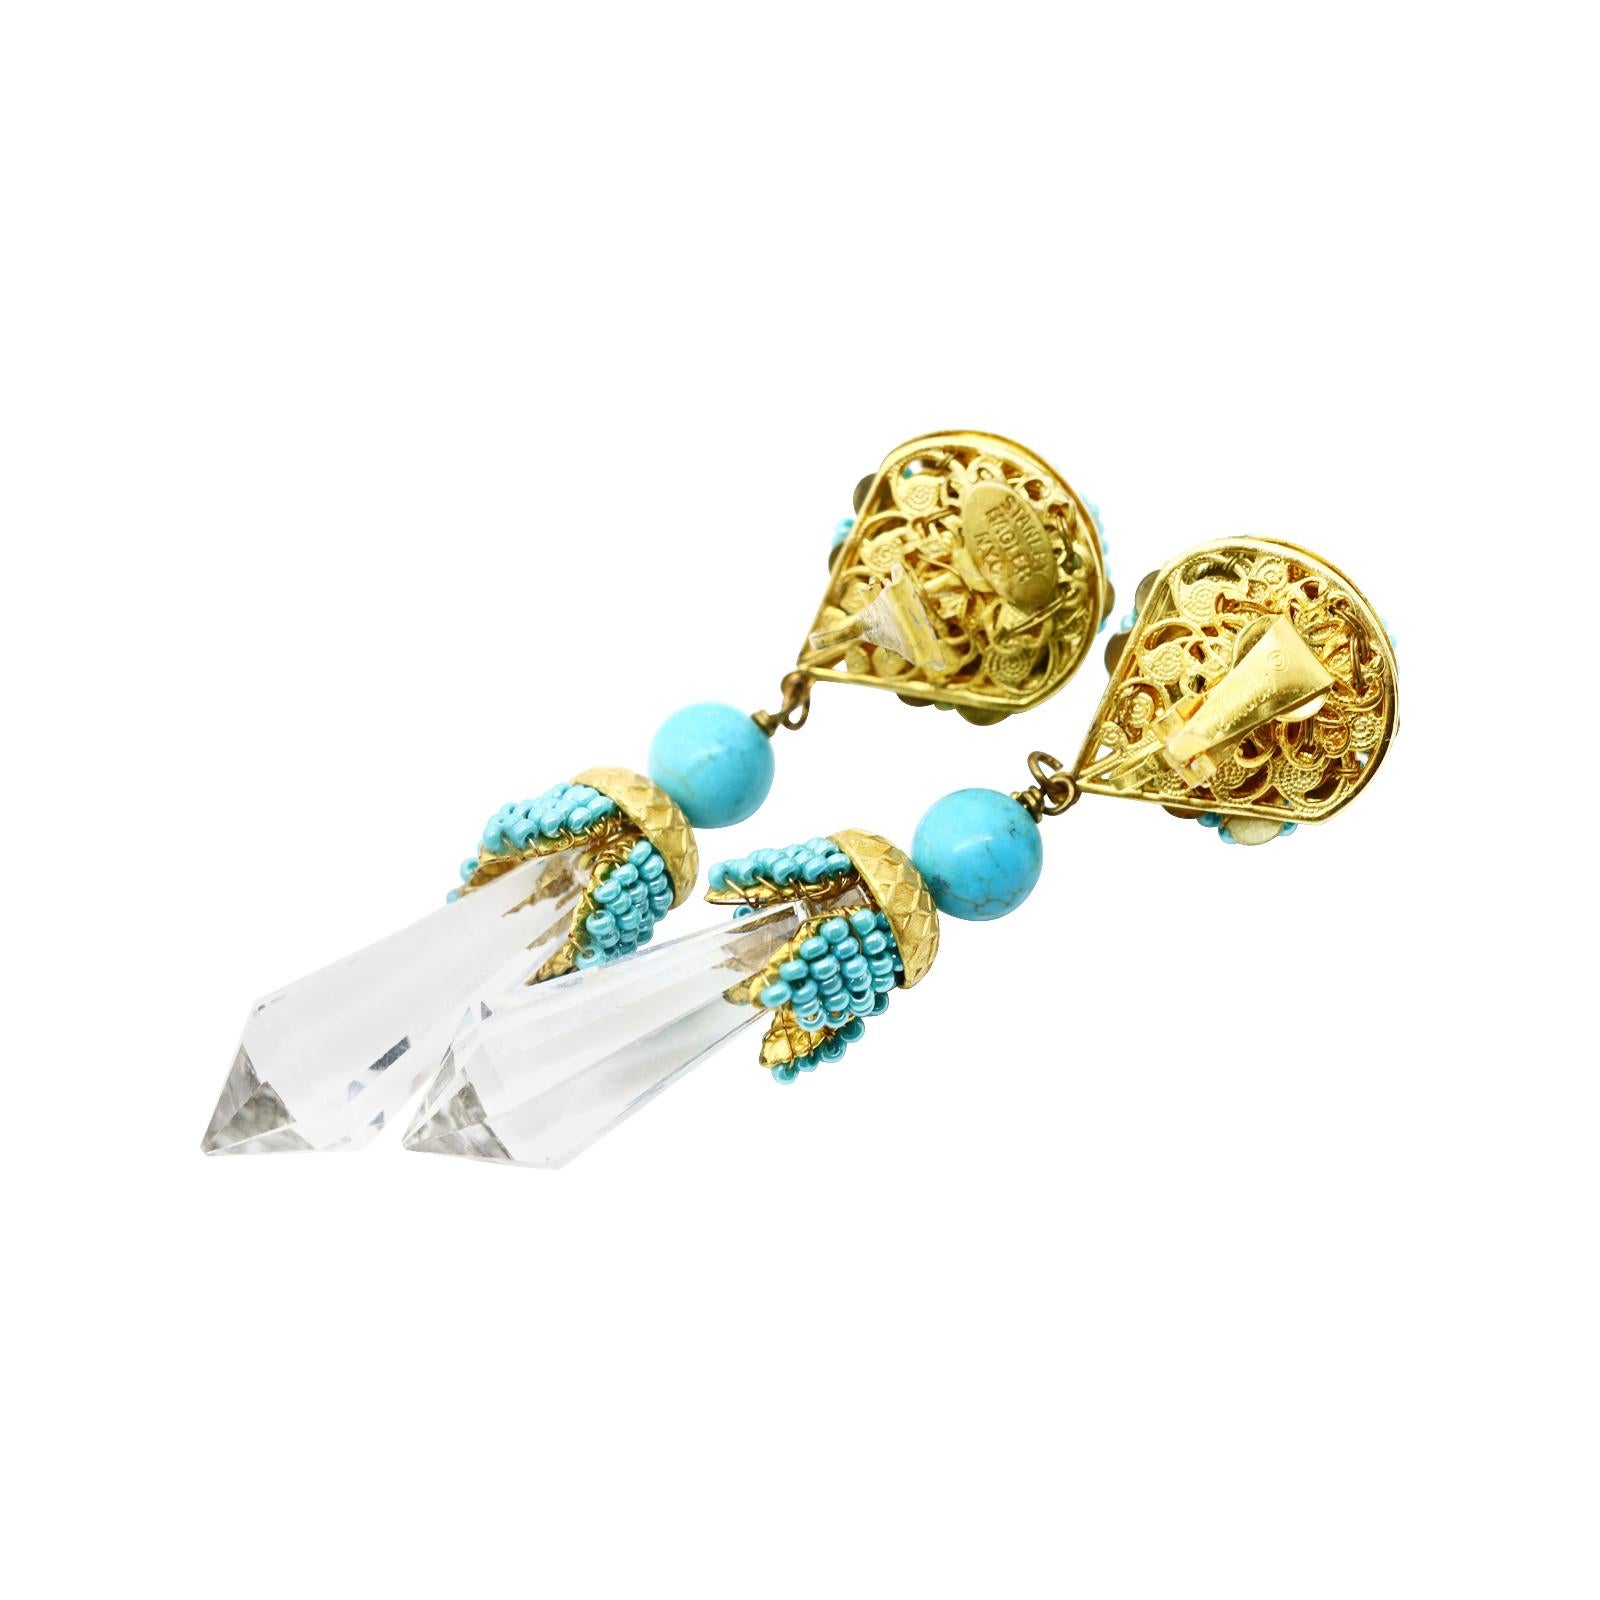 Vintage Stanley Hagler Faux Turquoise Dangling Crystal Earrings Circa 1960s For Sale 2